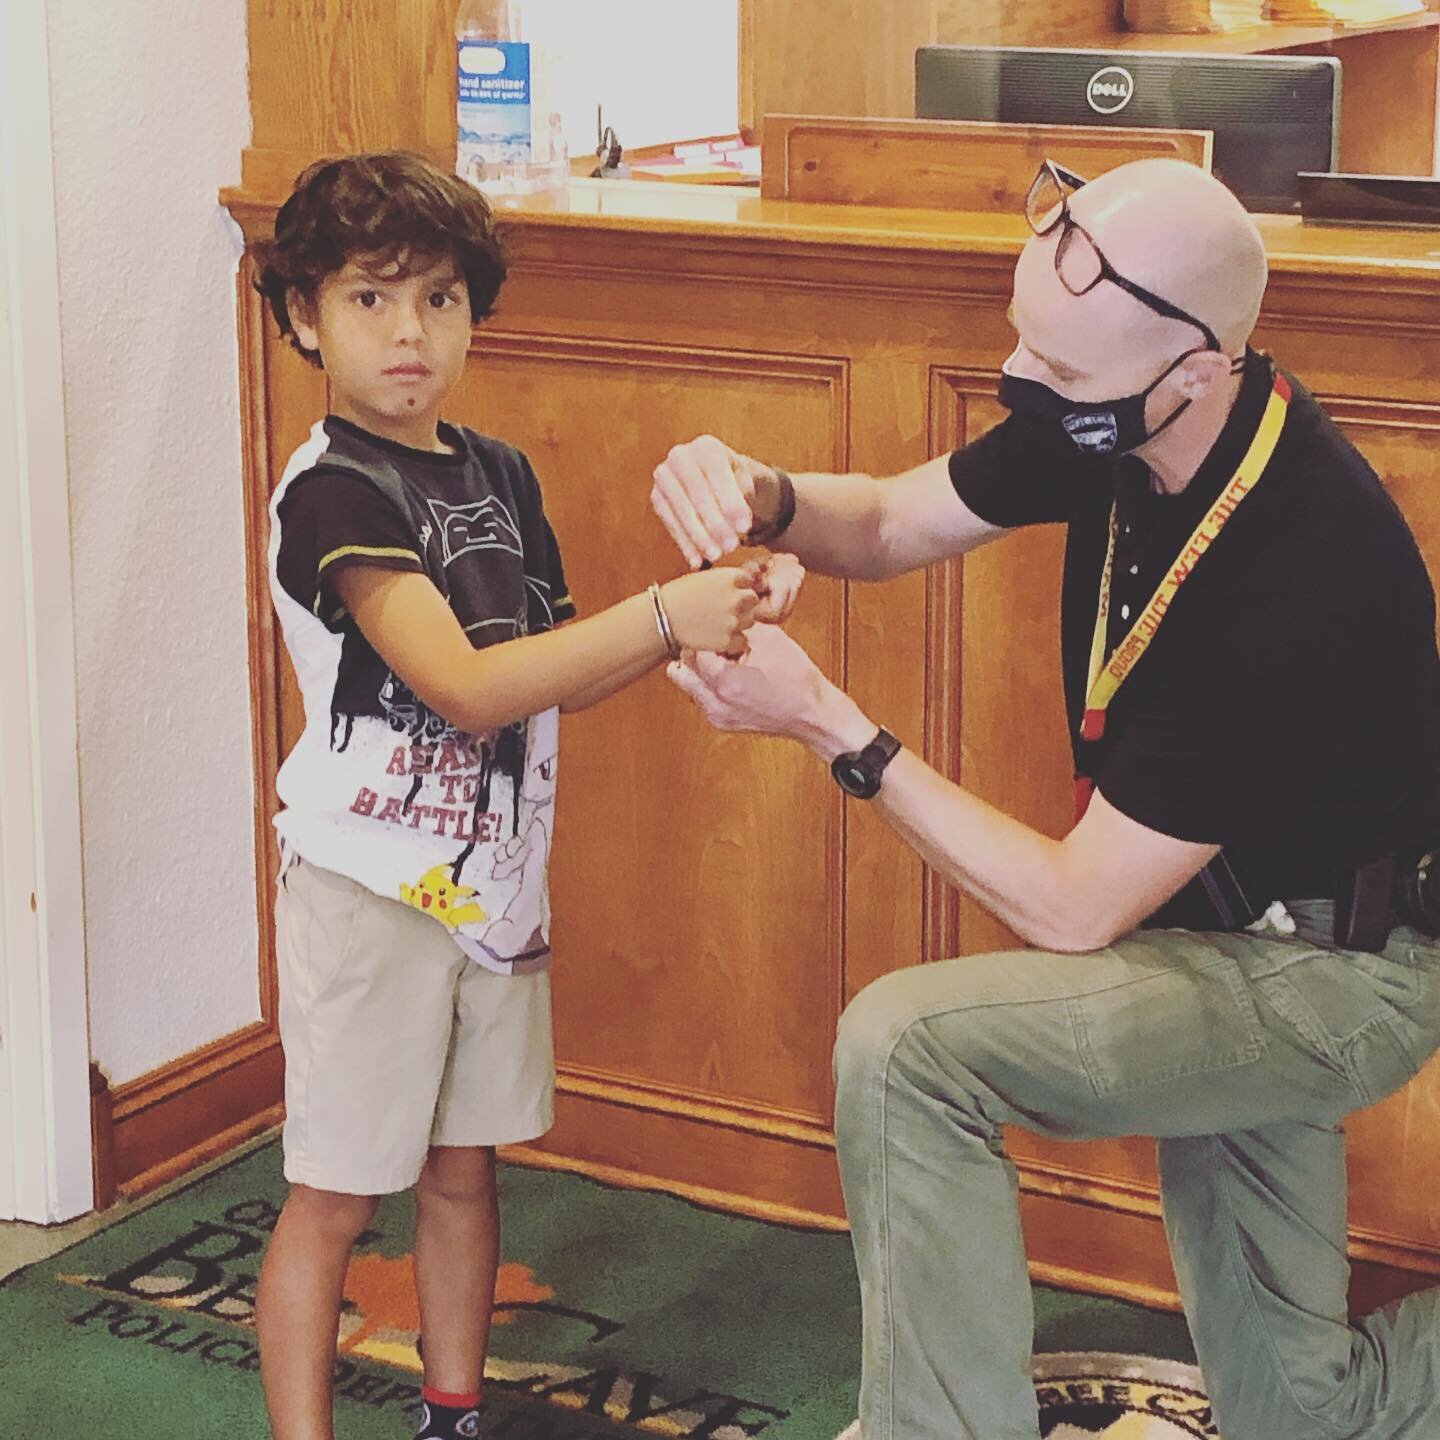 Is this Bee Cave&rsquo;s youngest suspect? Think again. 6 year old Tristan found a set of handcuffs without a key and got locked into a predicament. Tristan got a BCPD goodie bag and his parents got a brand new spare handcuff key! This guy made our d